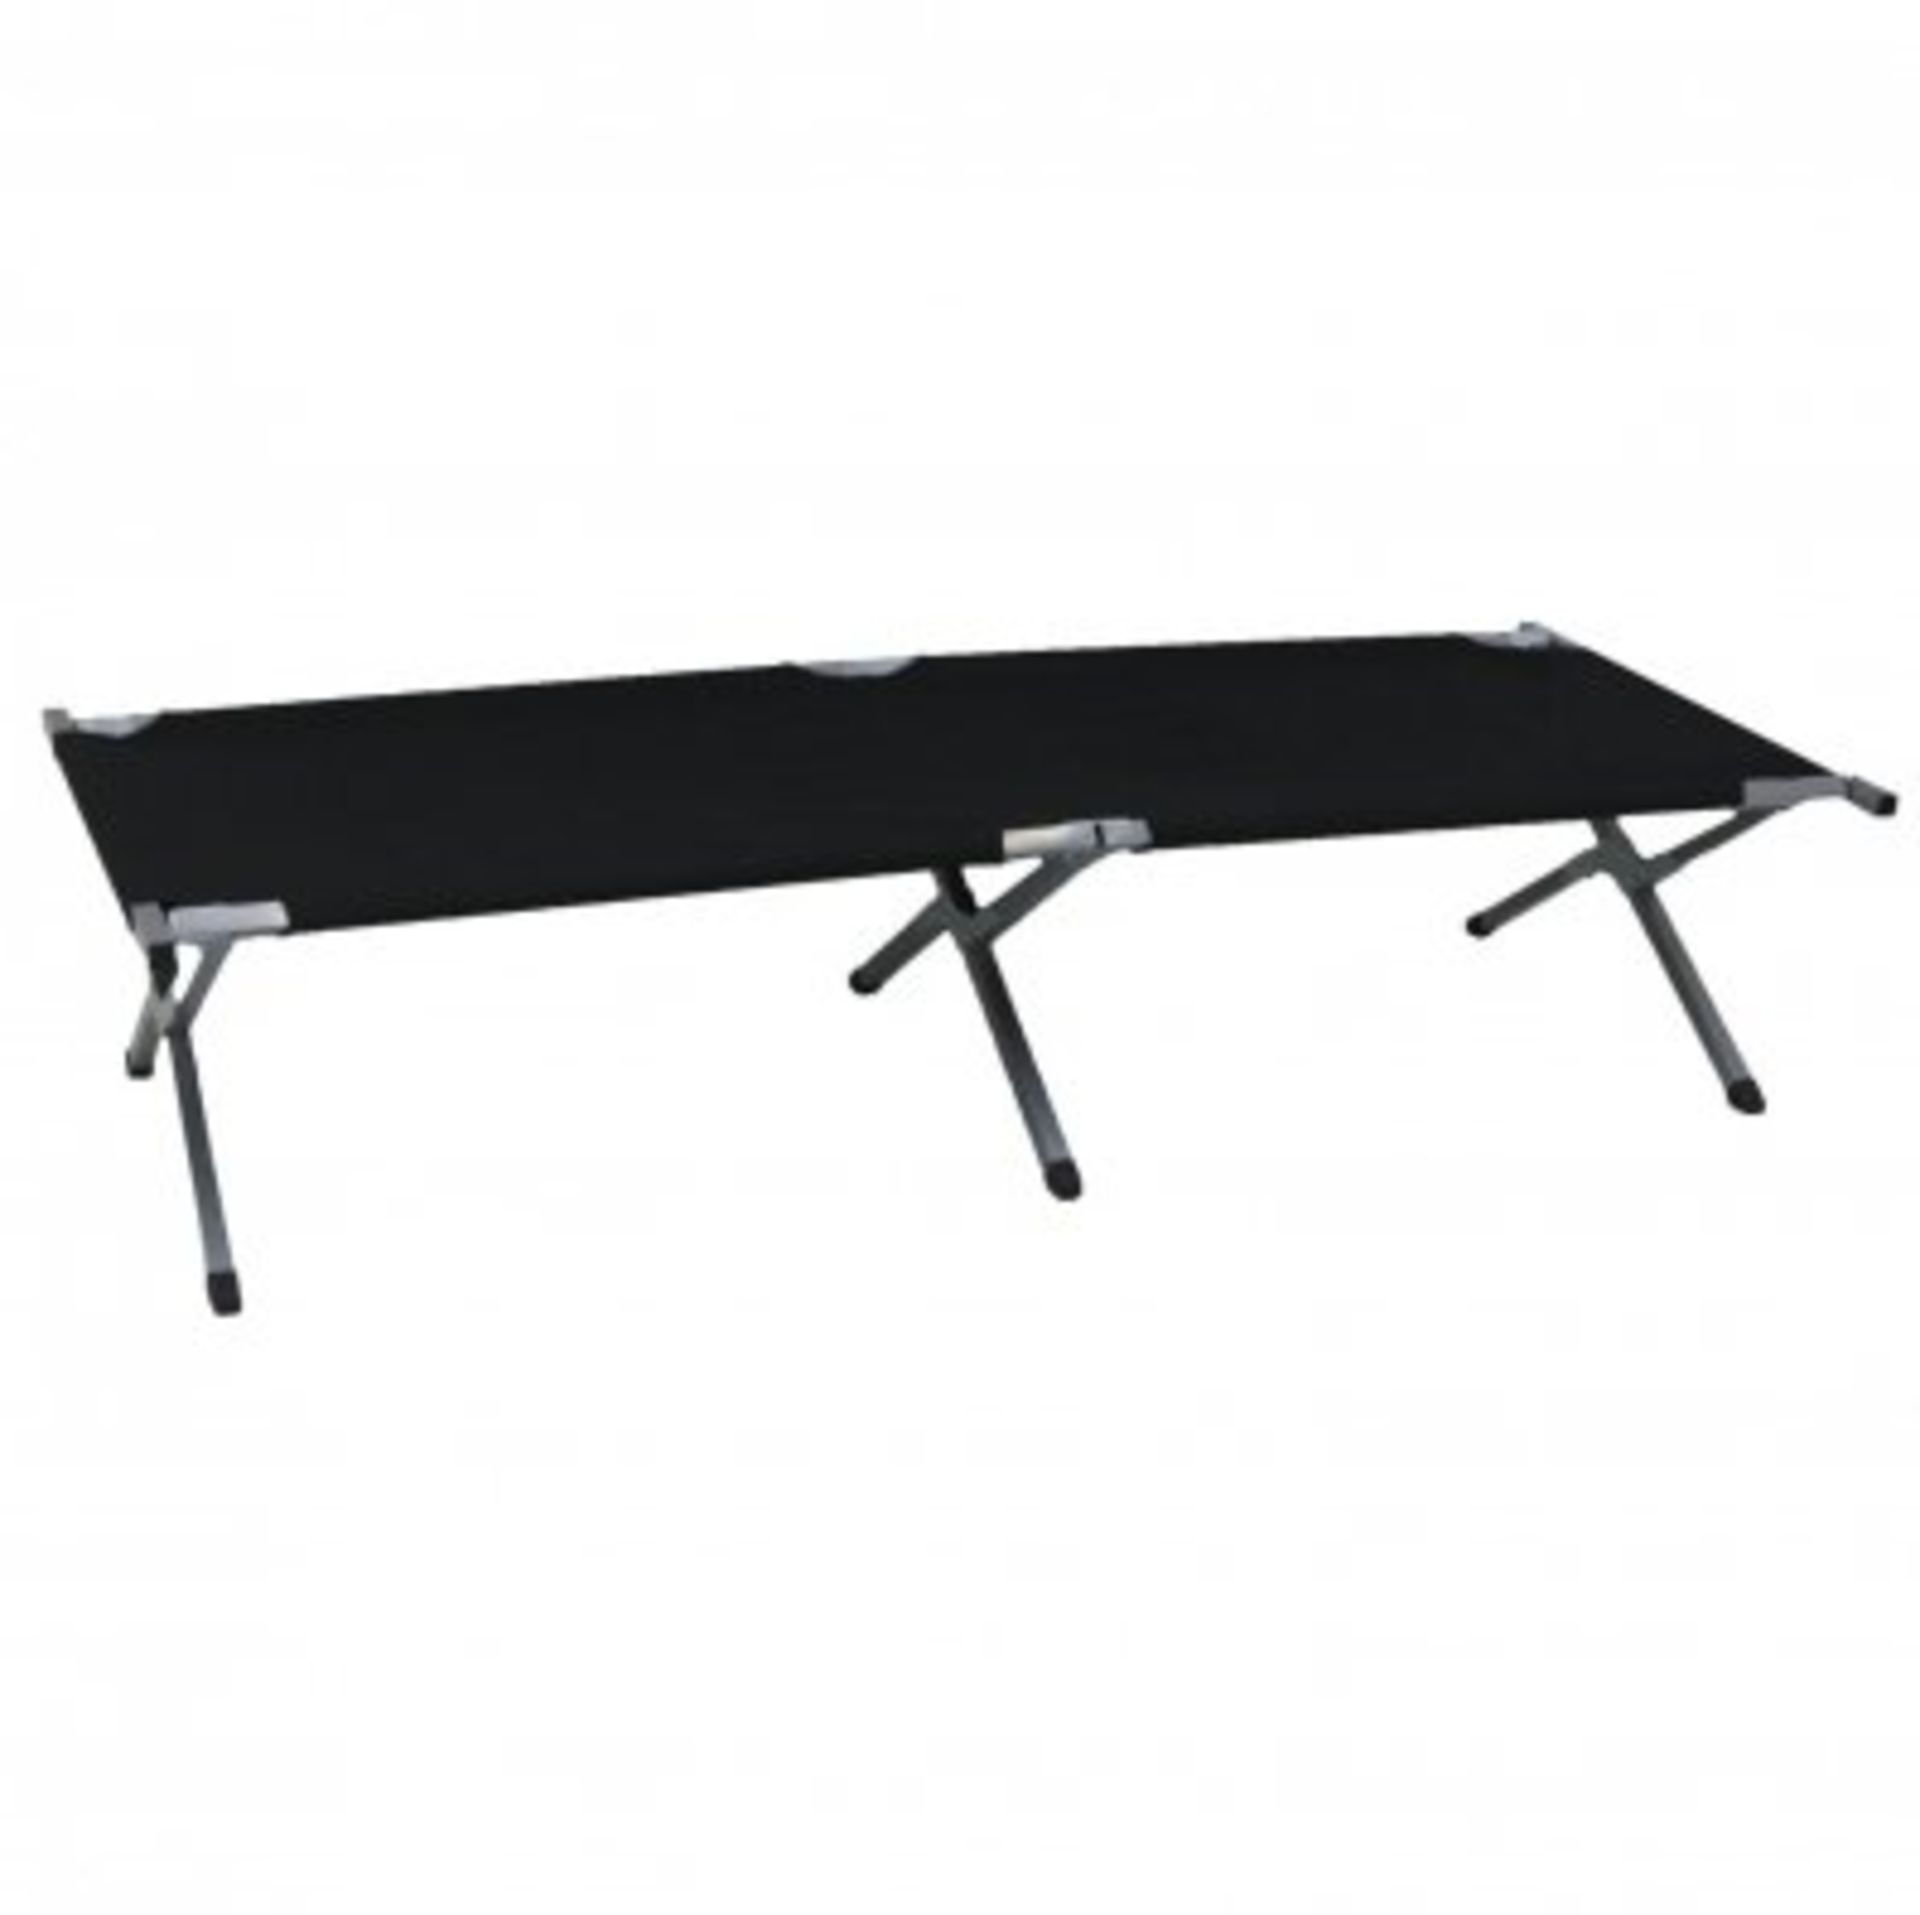 (ZP41) Heavy Duty Outdoor Folding Camping Bed Portable with Carry Bag The folding bed is p...